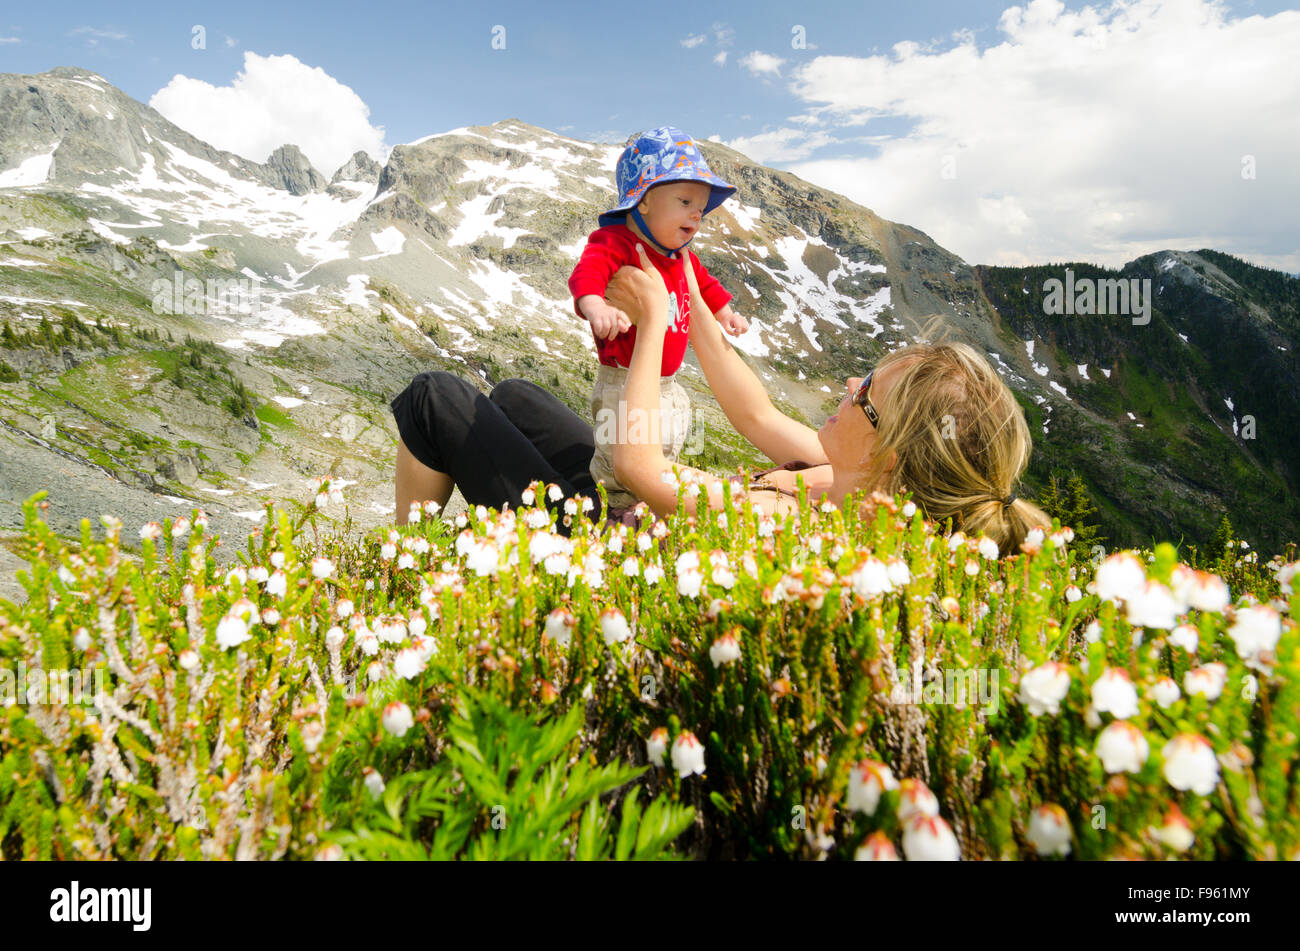 A young mother and her child lying in flower meadows at Alps Alturas near New Denver, British Columbia Stock Photo